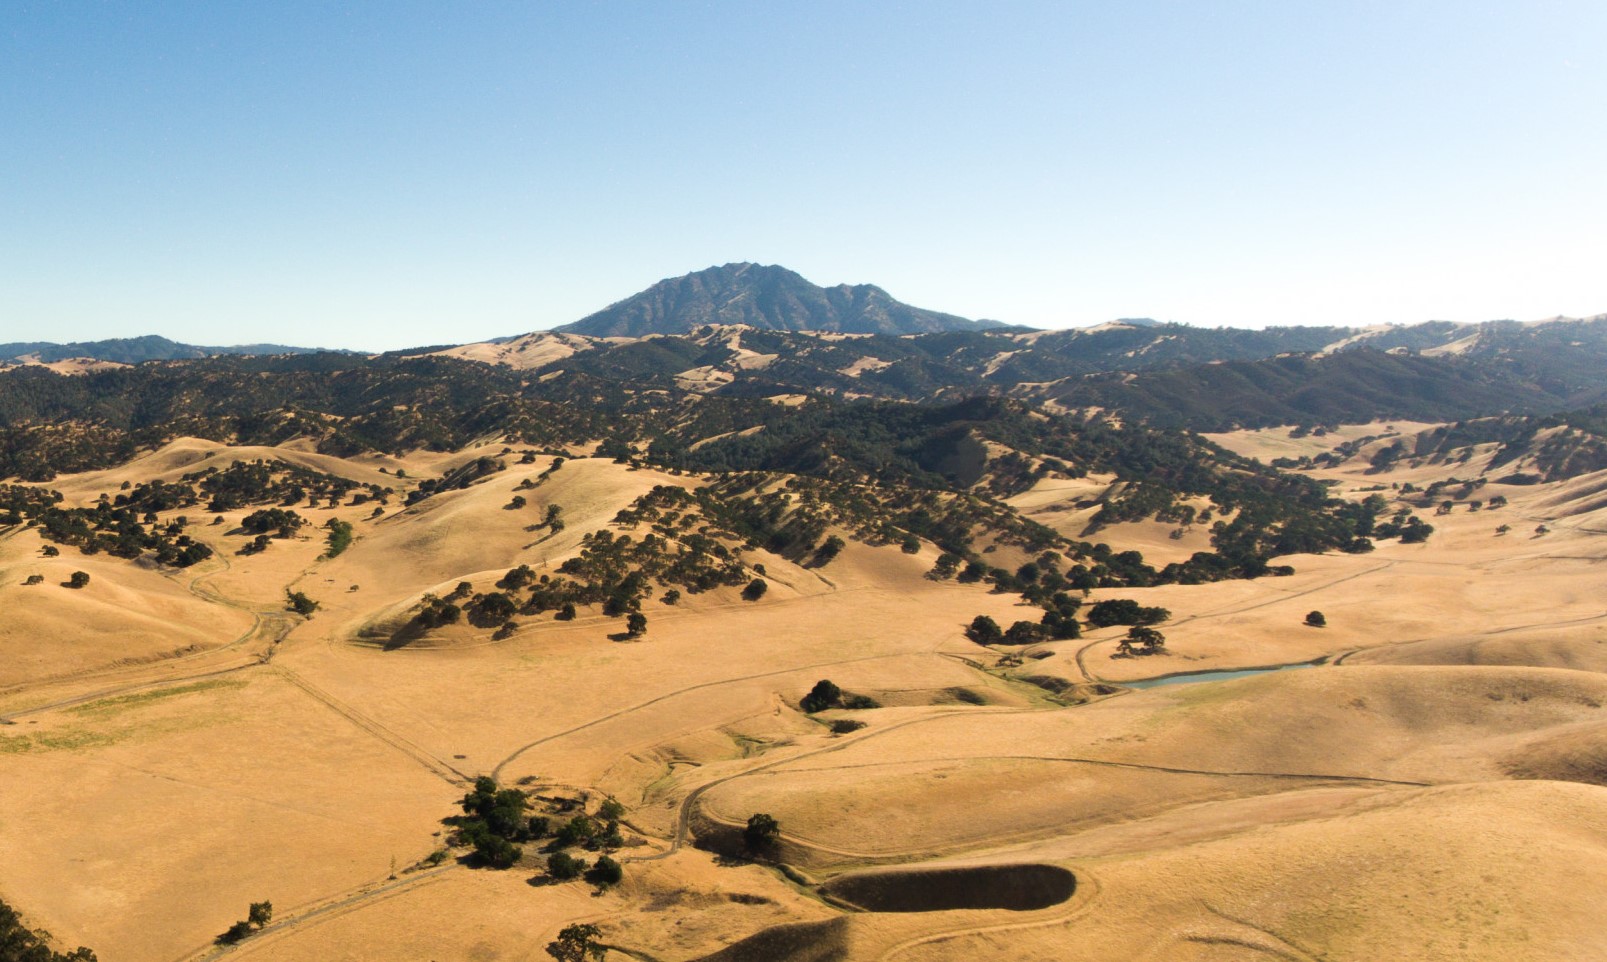 Mount Diablo and its foothills to the east